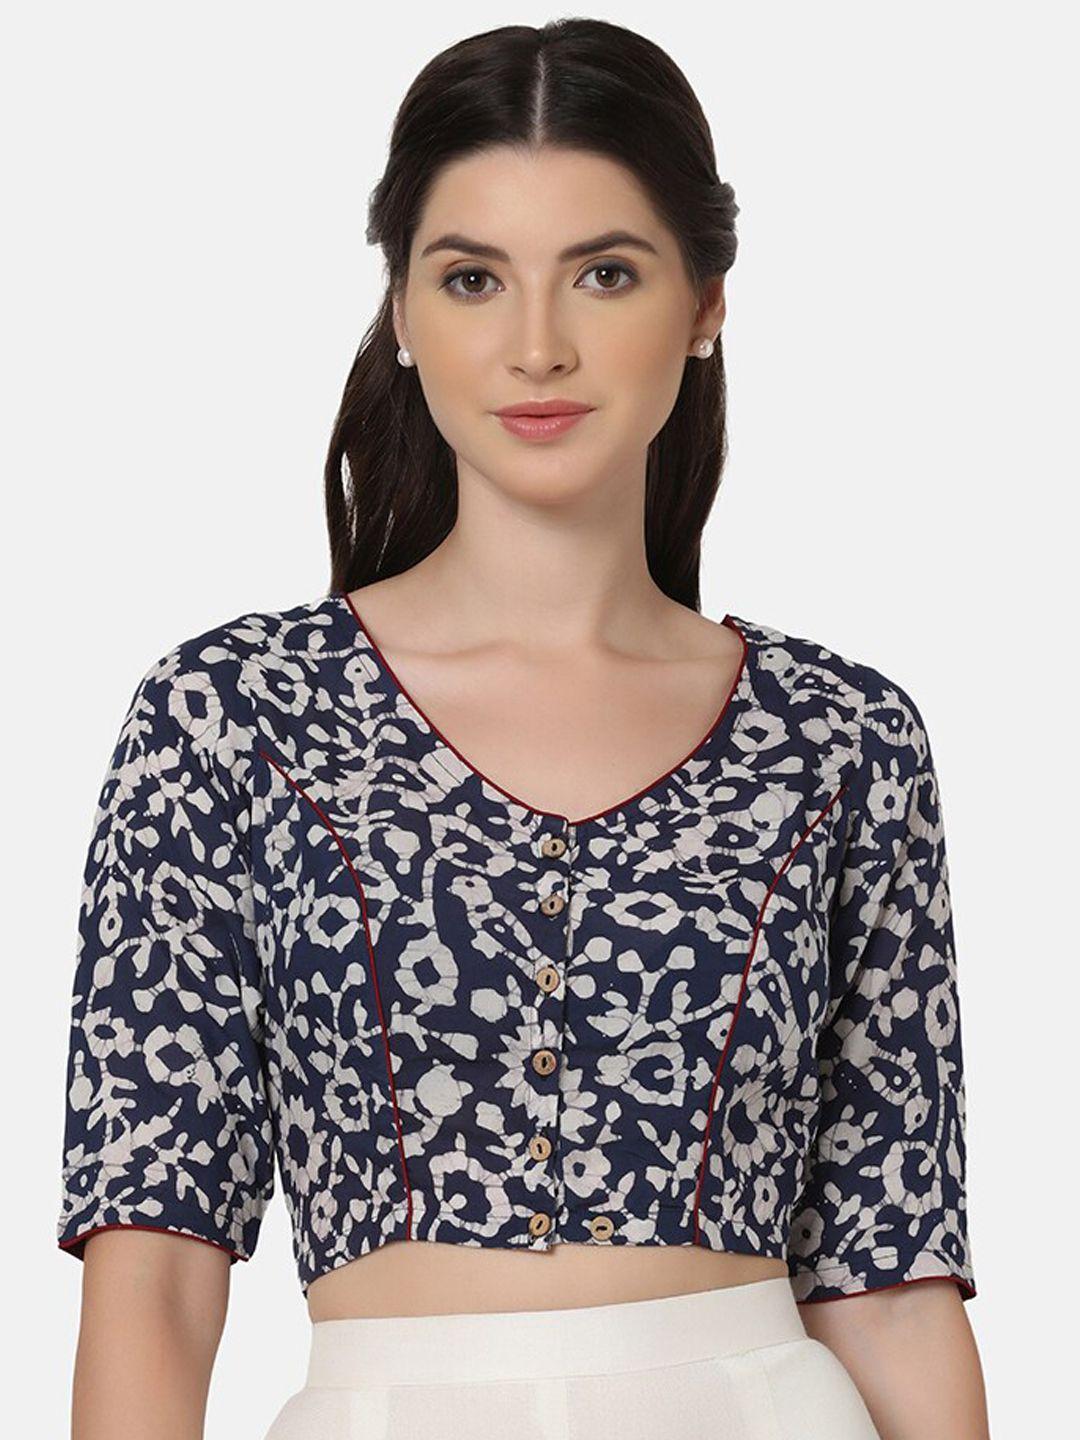 the weave traveller navy blue & beige printed cotton saree blouse